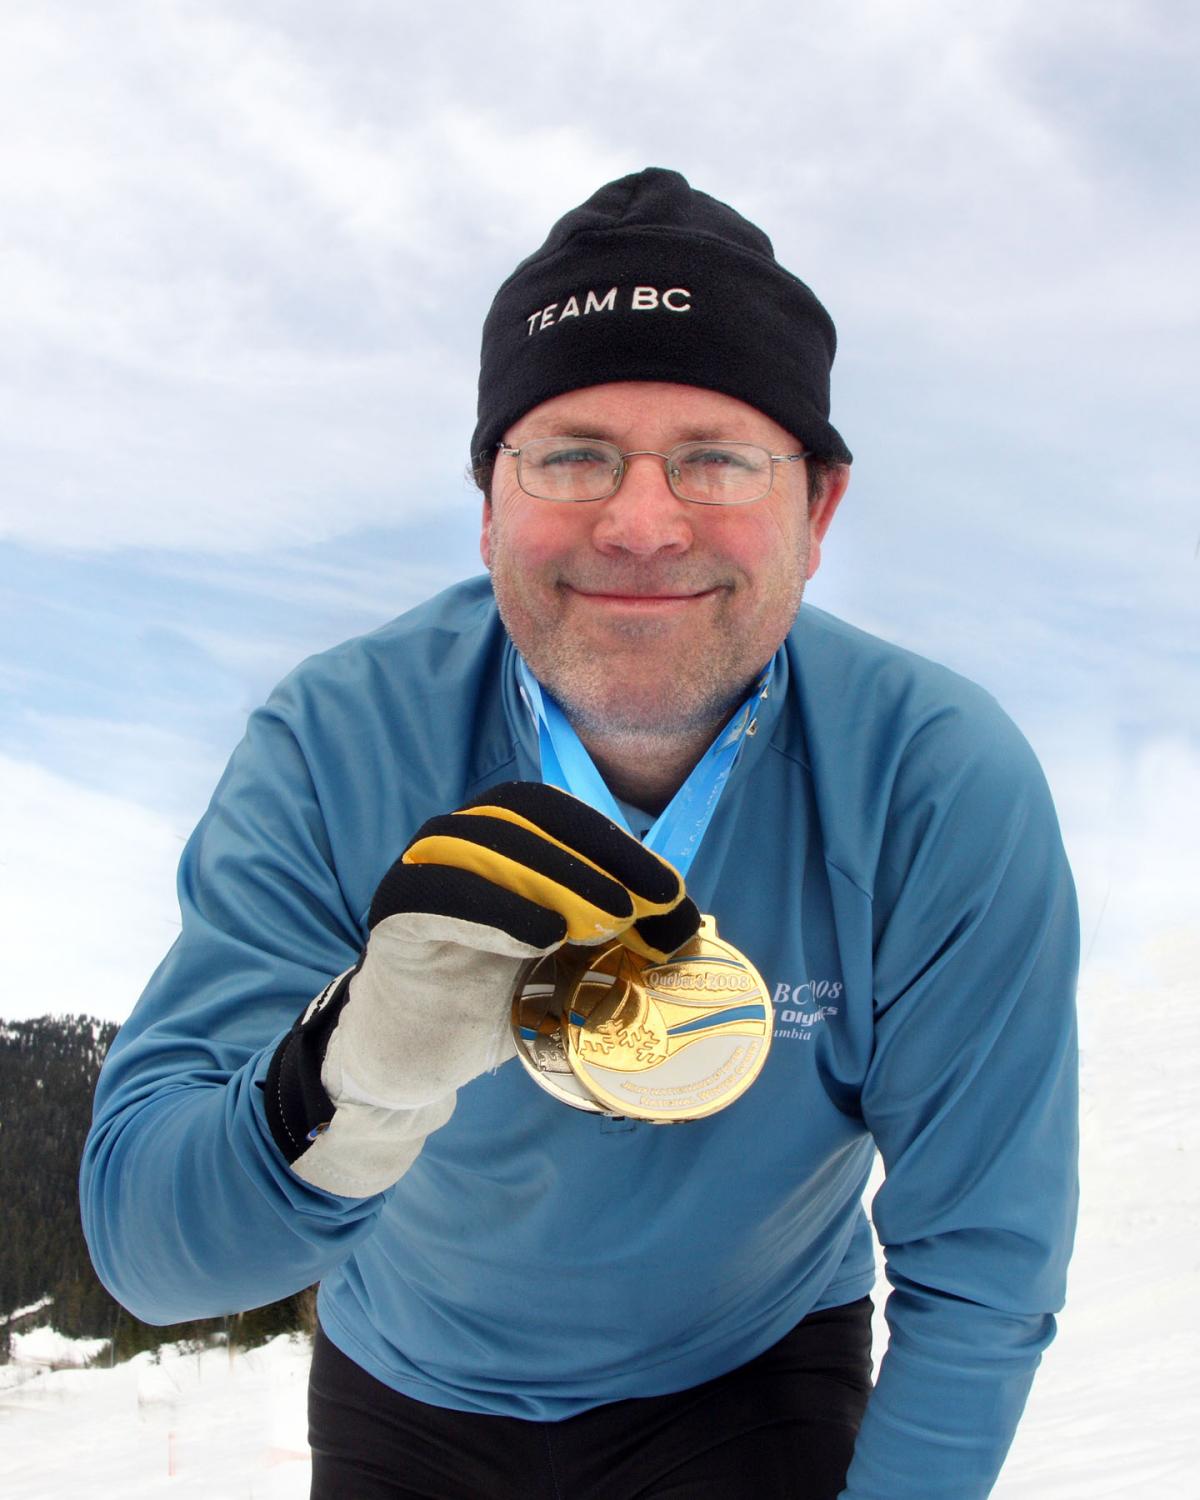 A smiling middle aged white man with glasses and light facial stubble wearing a jacket and black toque holding two Special Olympics medals